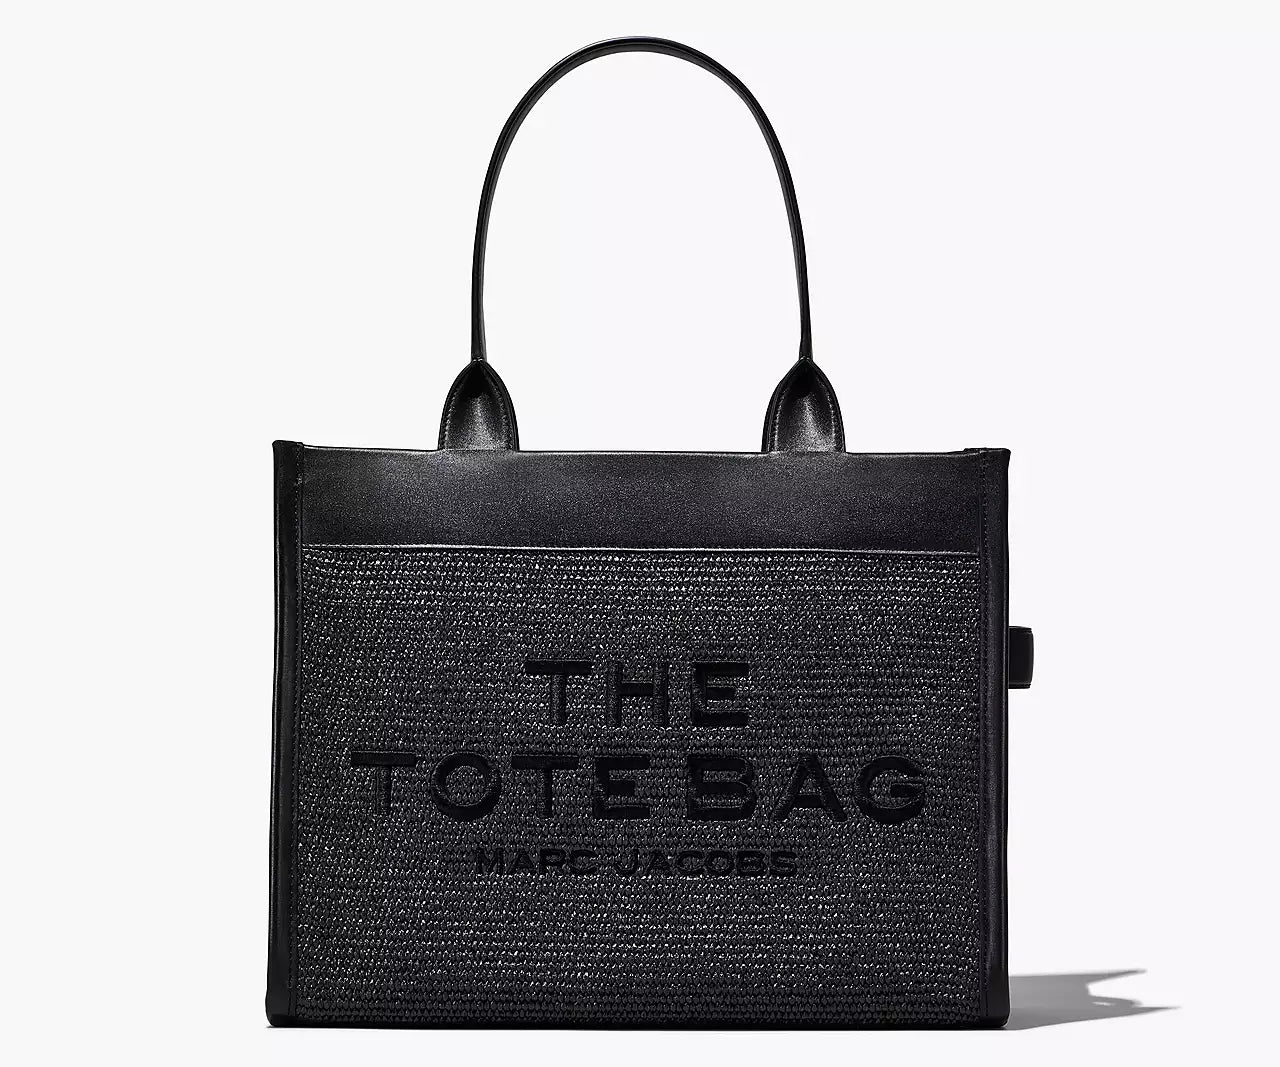 THE WOVEN DTM LARGE TOTE BAG